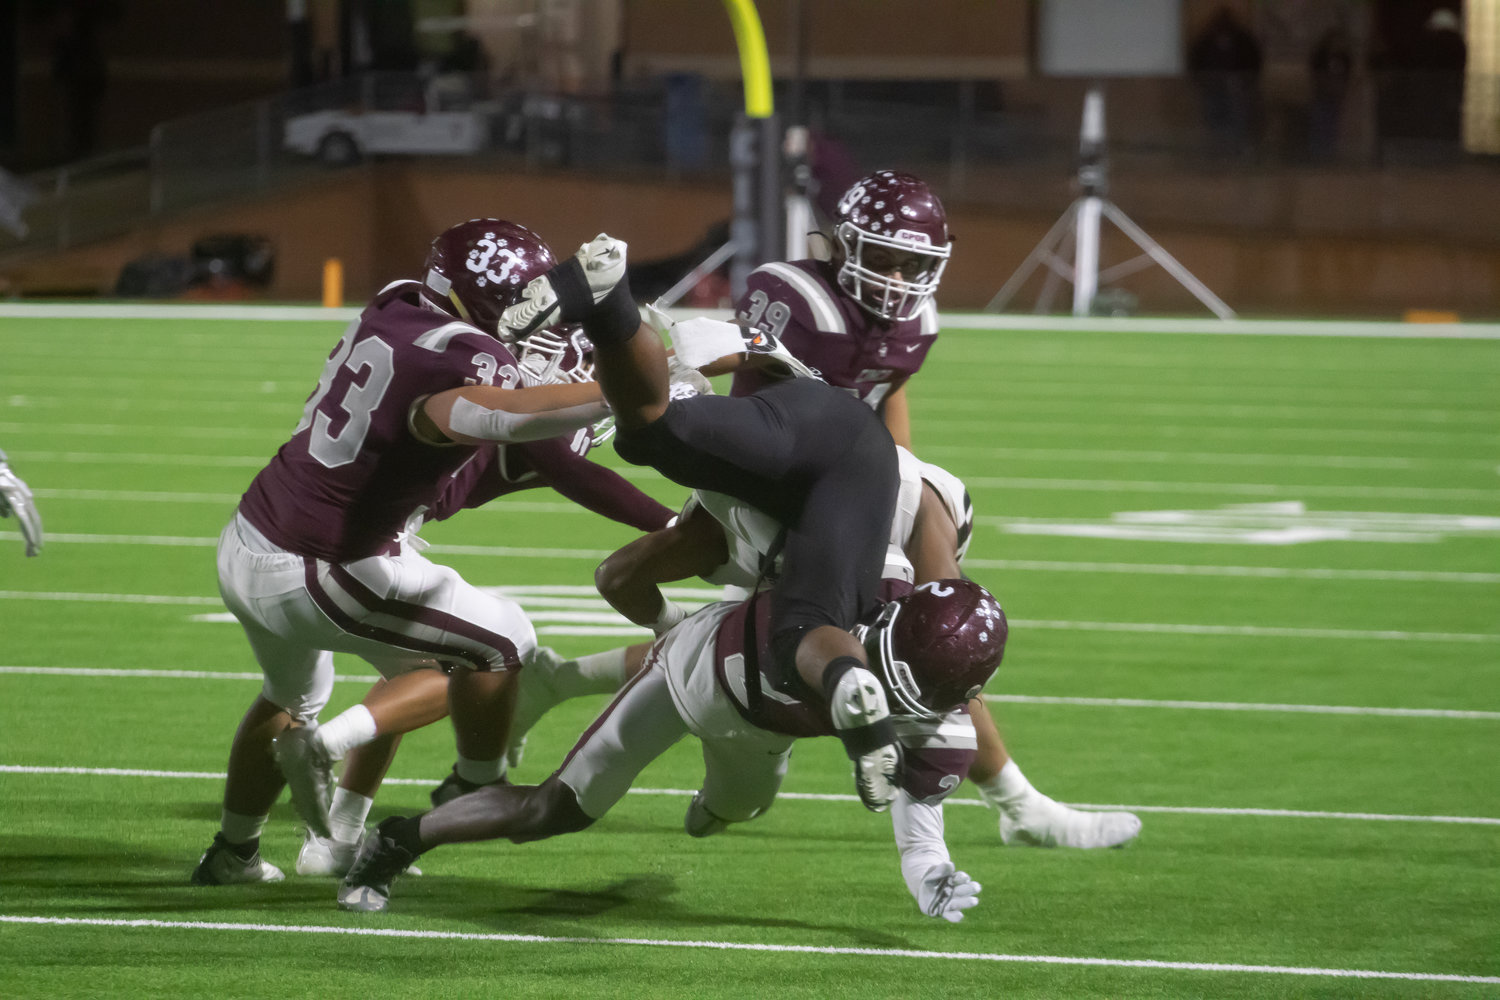 Cinco Ranch's defense wraps up a ballcarrier during Friday's game between Cinco Ranch and George Ranch at Rhodes Stadium.